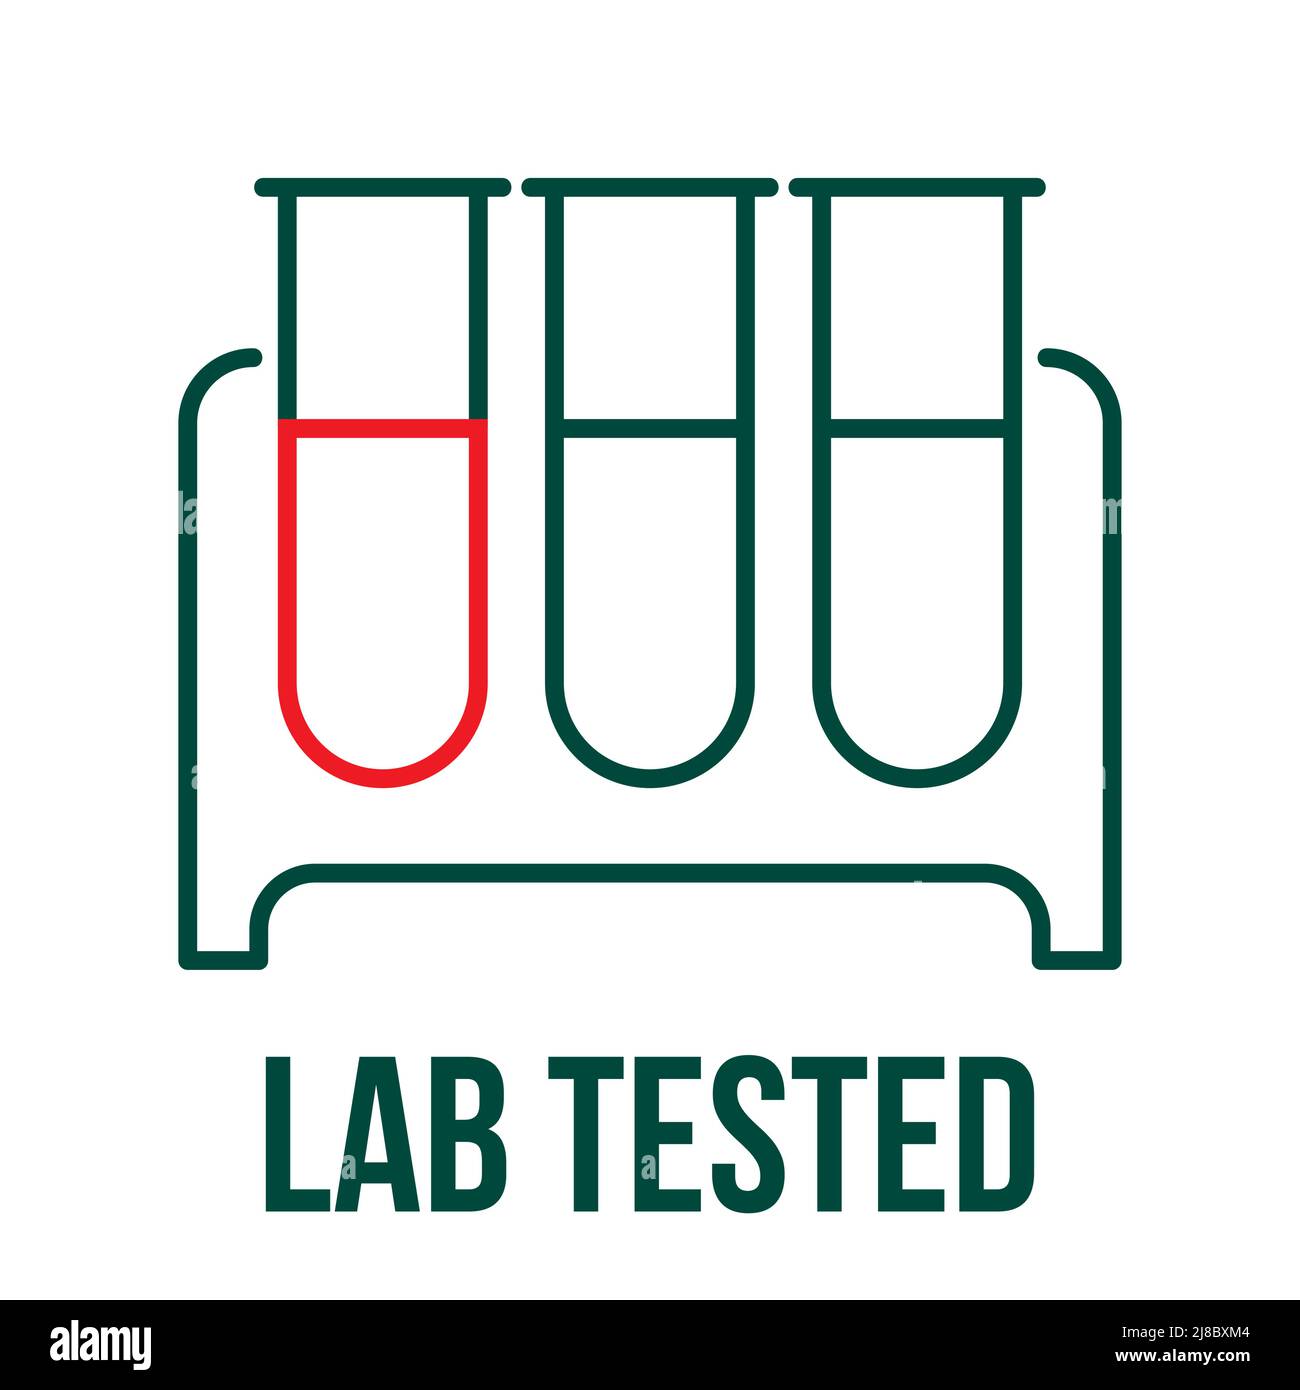 Lab Tested icon. flask, test tube. Lab equipments. Laboratory Experiment symbol, Test Tubes. Flasks icon. Stock Vector